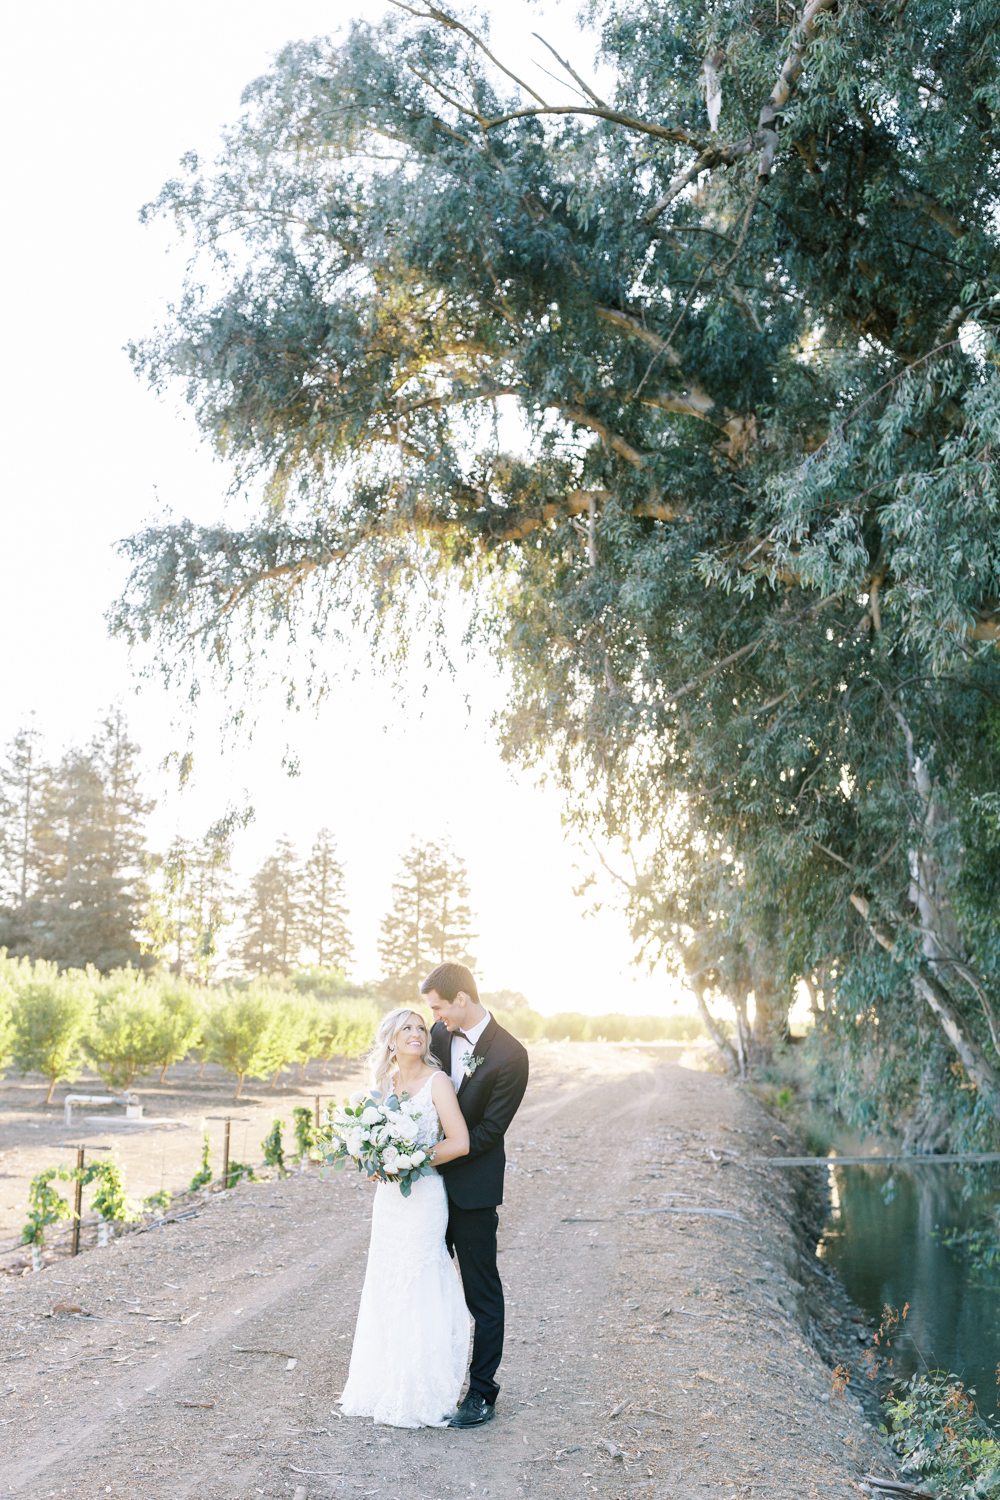 groom hugging bride and smiling almond orchard in background along eucalyptus lined canal